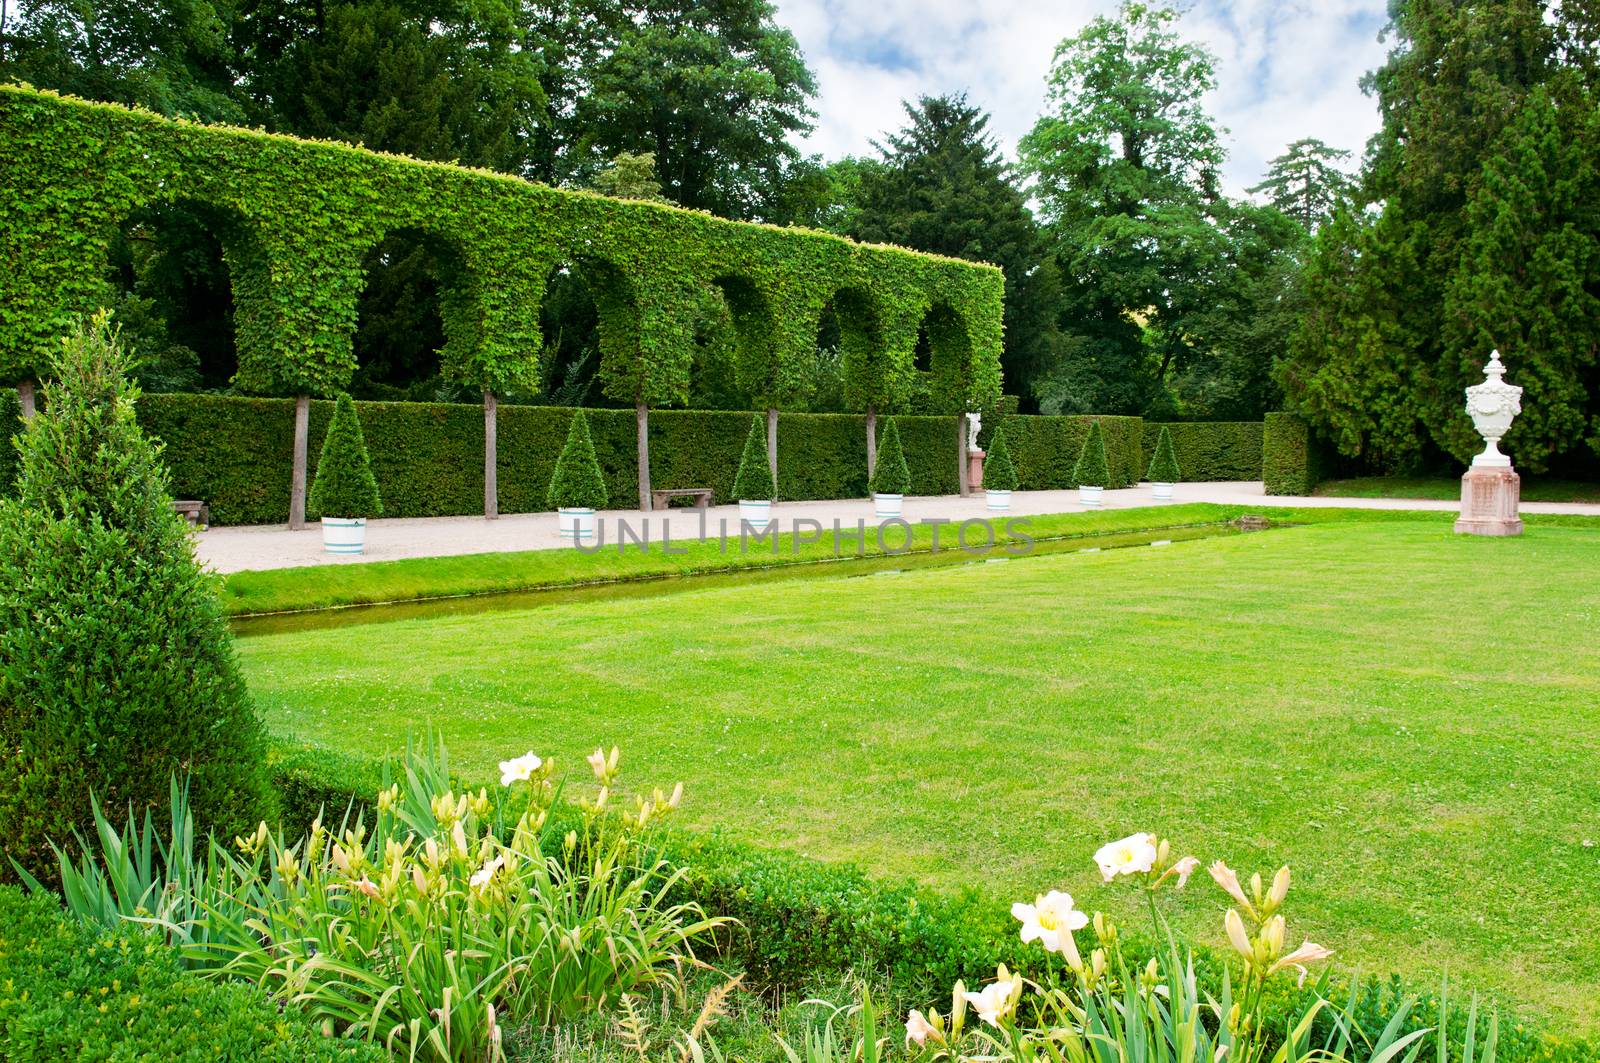  lawn and hedge in a summer park